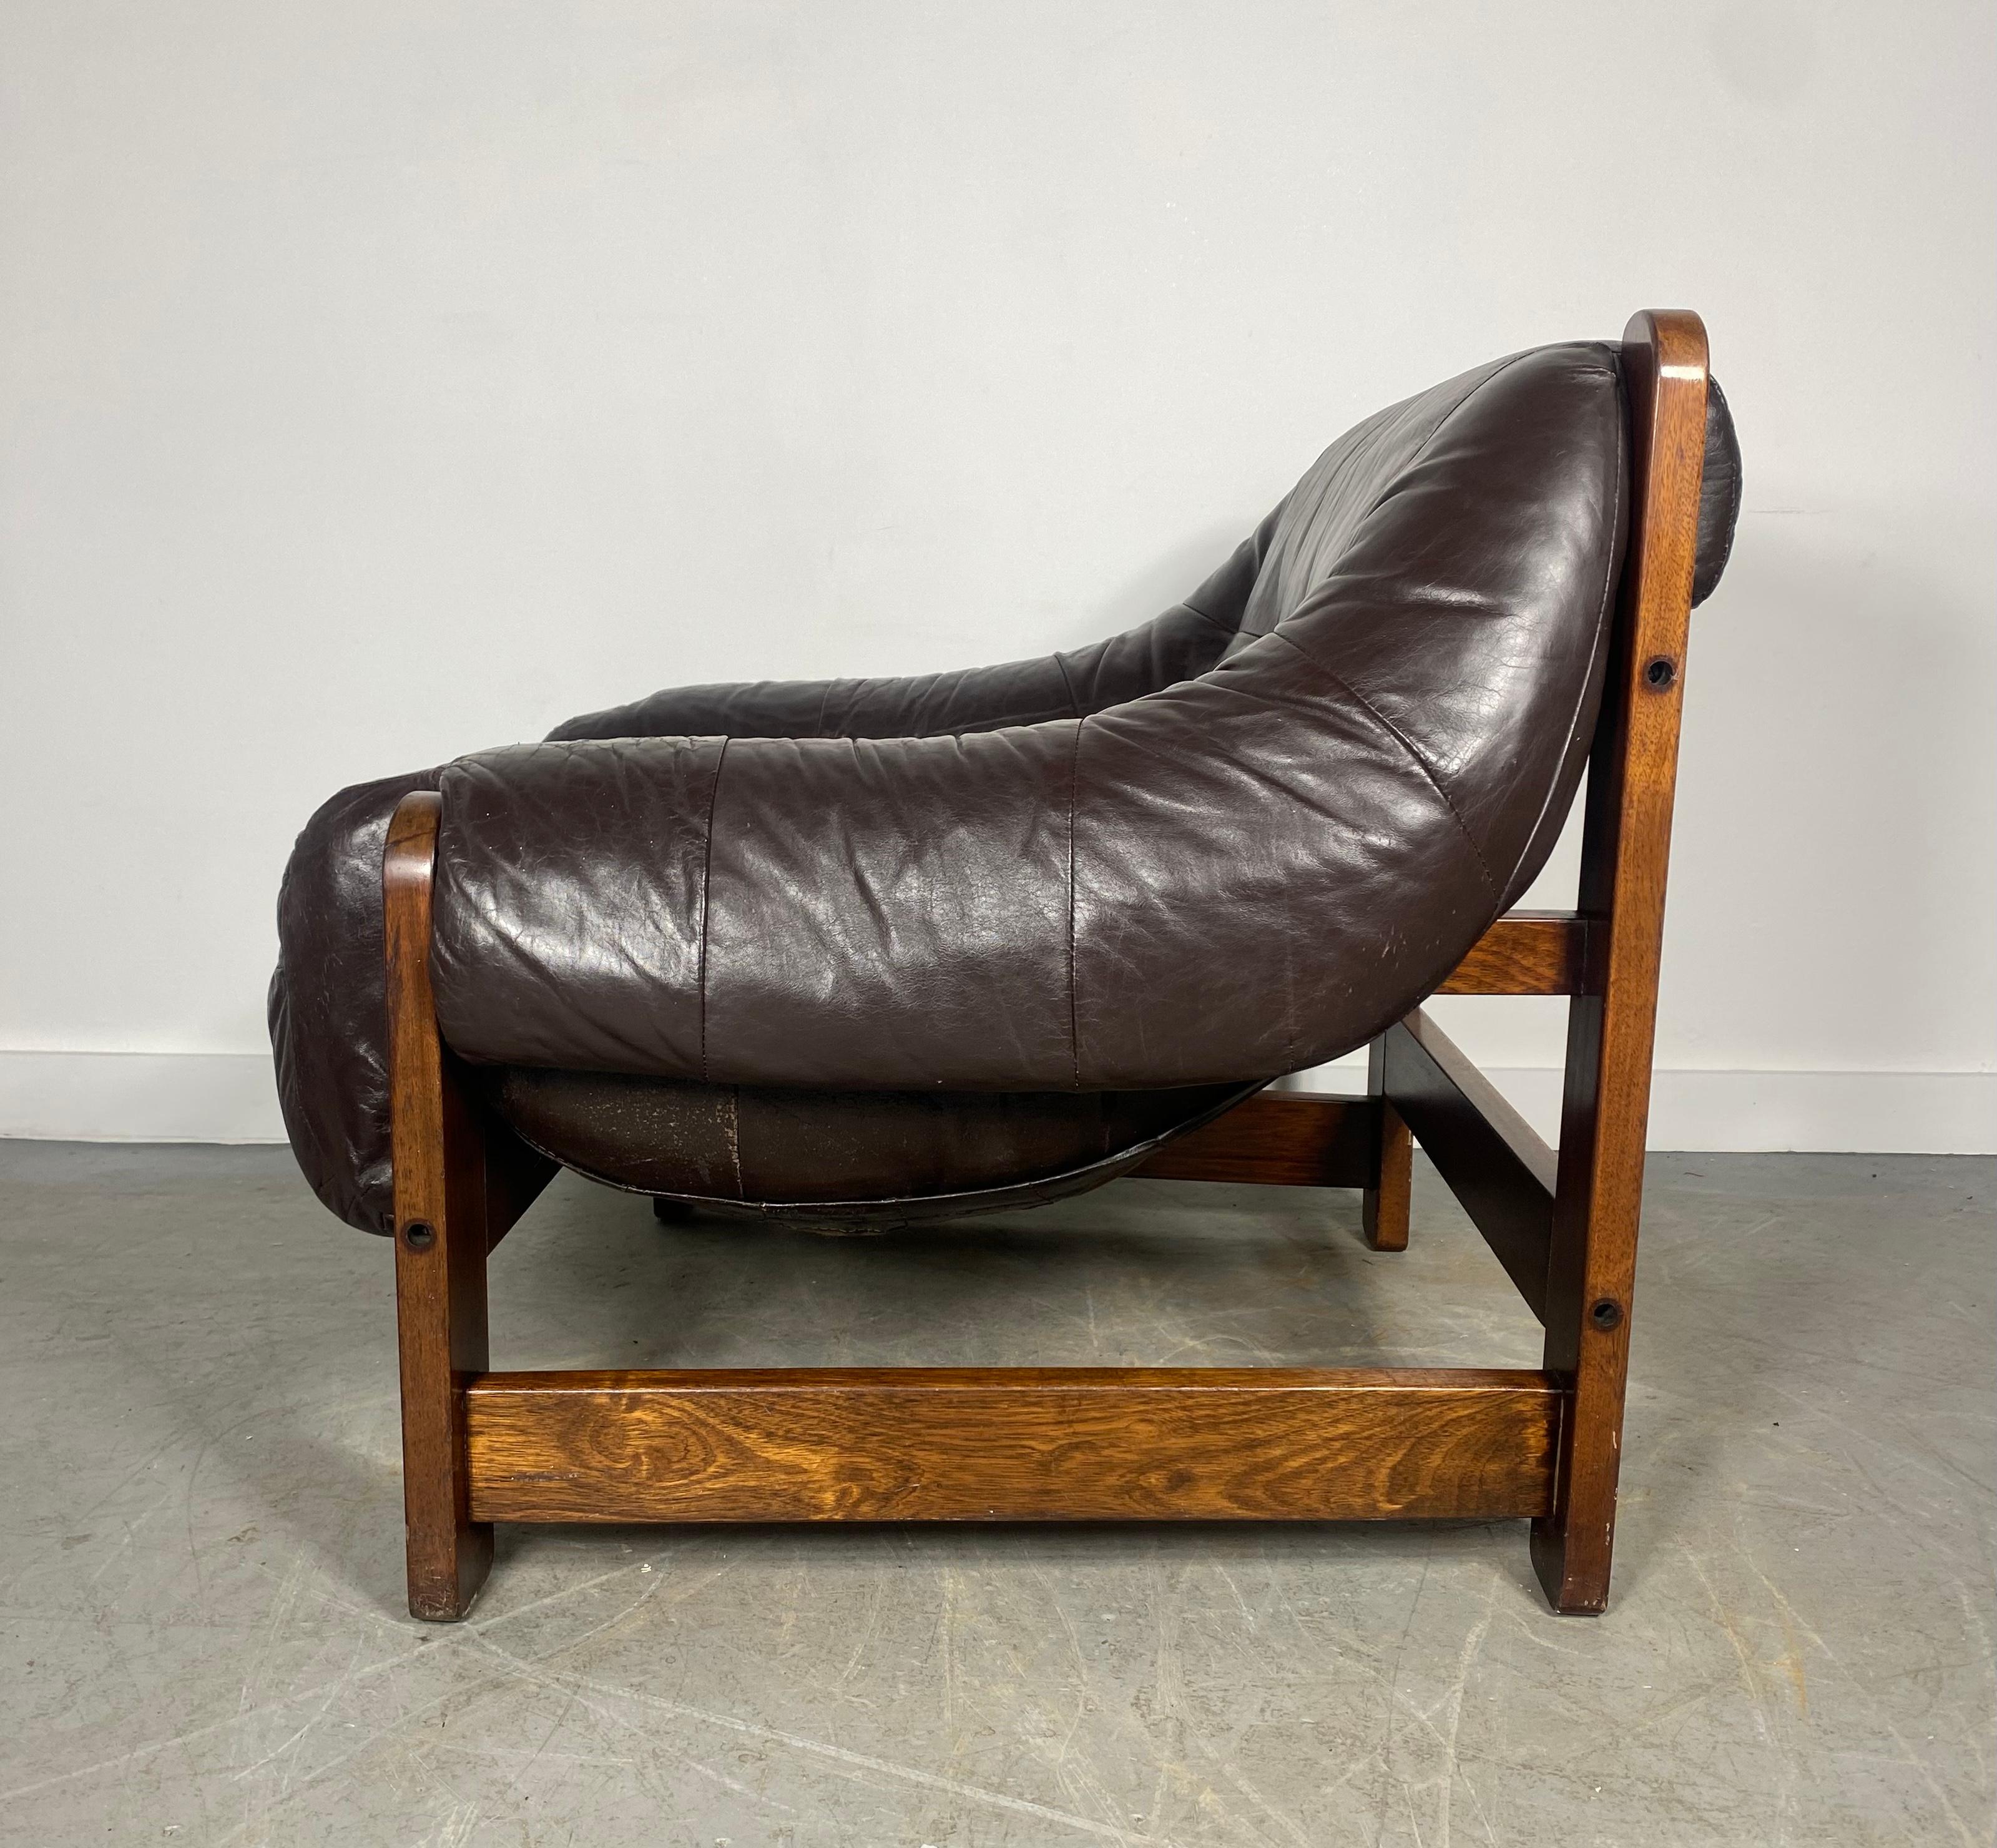 Mid-Century Modern Brazilian Rosewood and Leather Lounge Chair Designed by Moveis Corazza